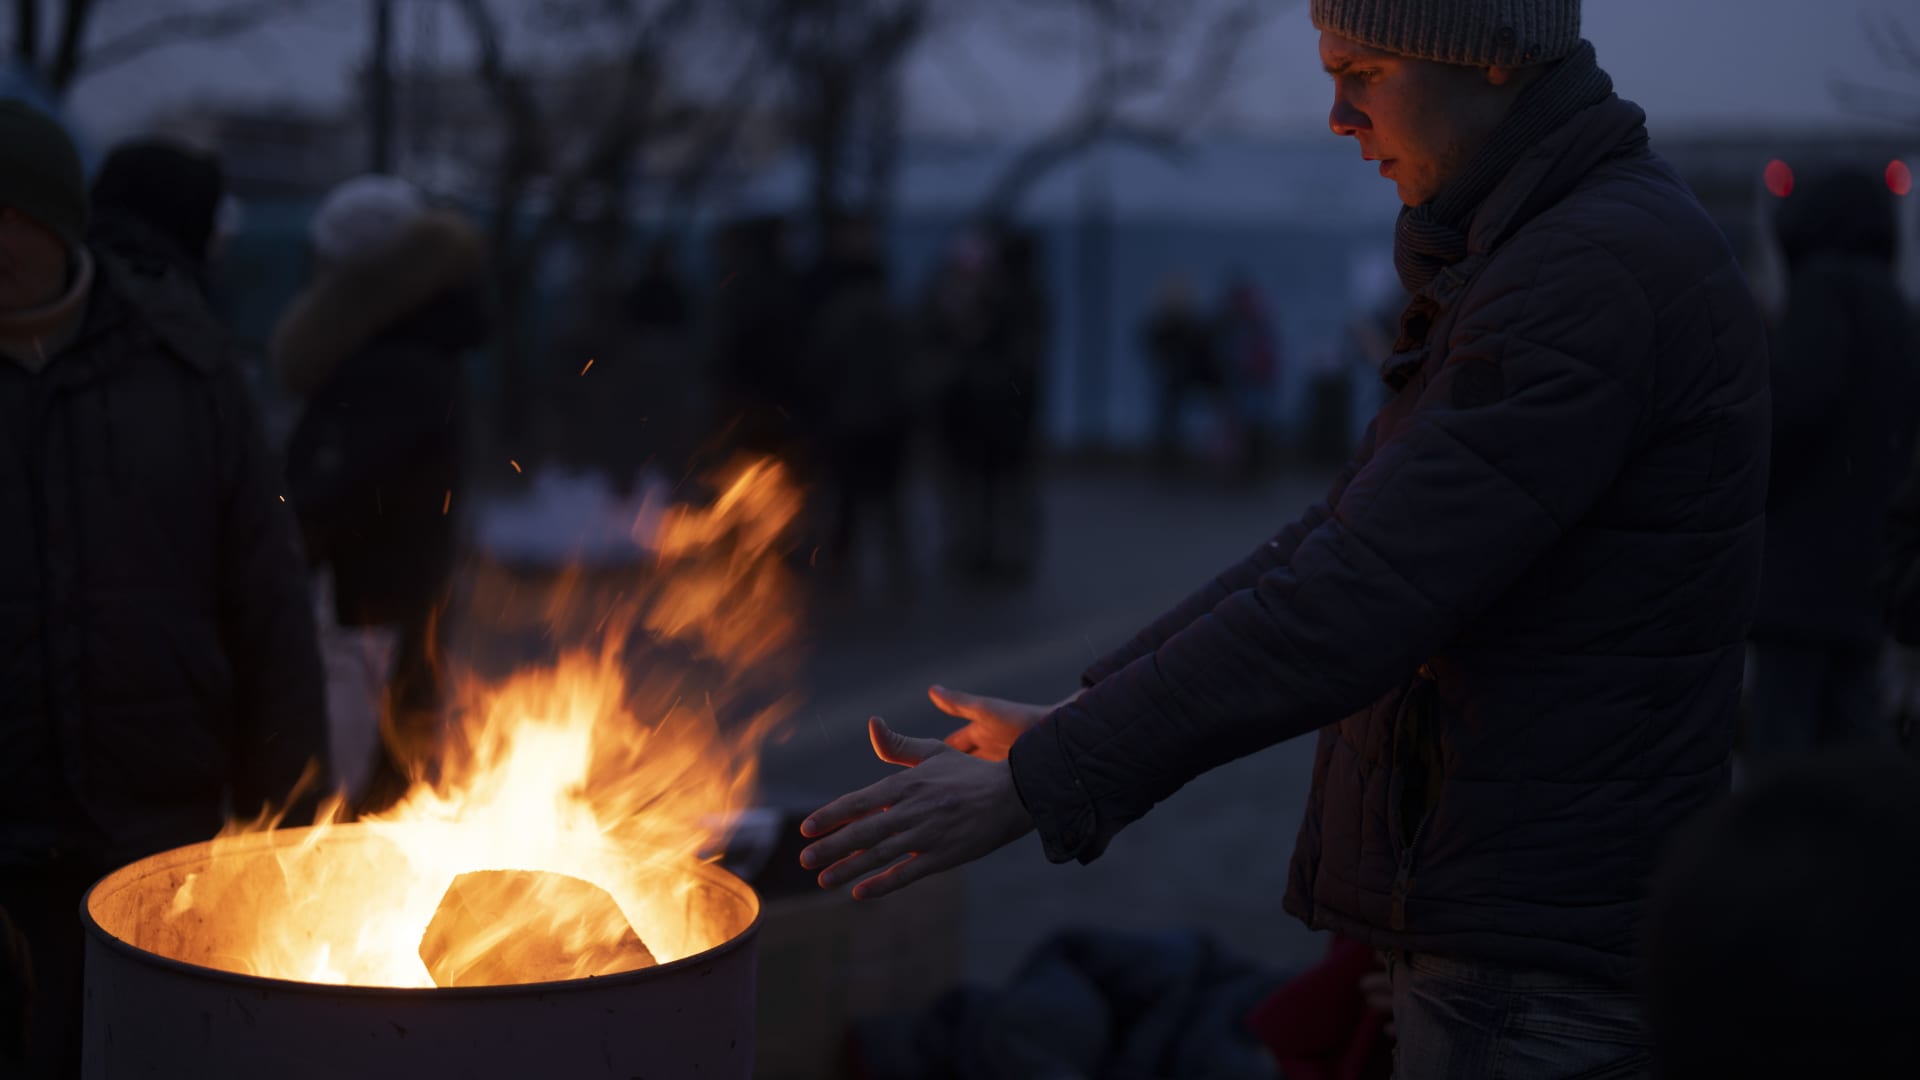 ‘There may be no light for a very long time’: Ukrainians face a massive test of survival this winter